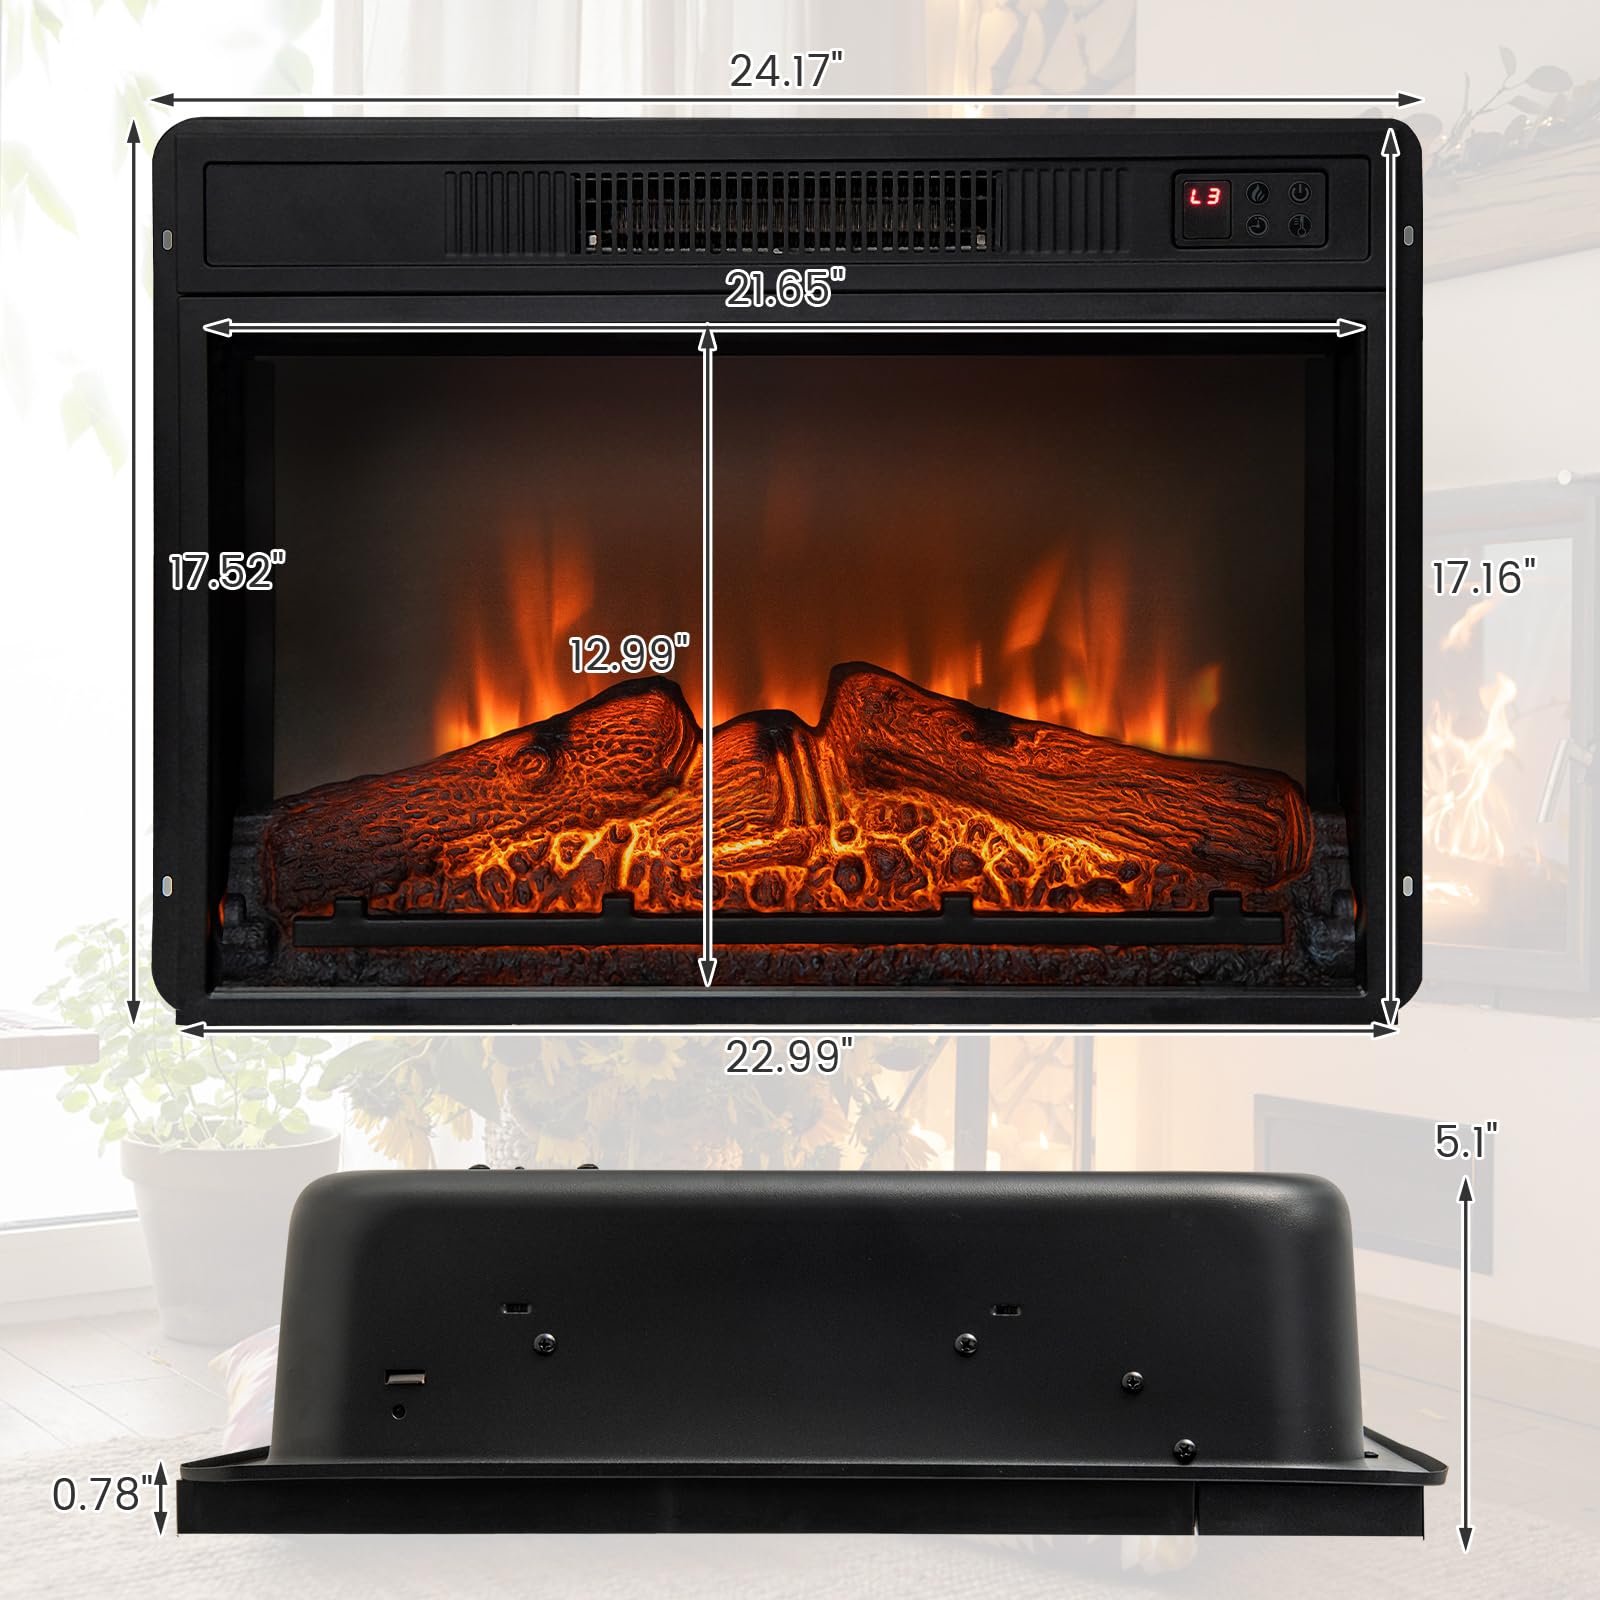 COSTWAY Electric Fireplace Insert 23-inch Wide, 1400W Recessed Fireplace Heater with Remote Control, 3 LED Flame Effects, 6H Timer, Electric Fireplace for Bedroom Home Office Indoor Use, Black